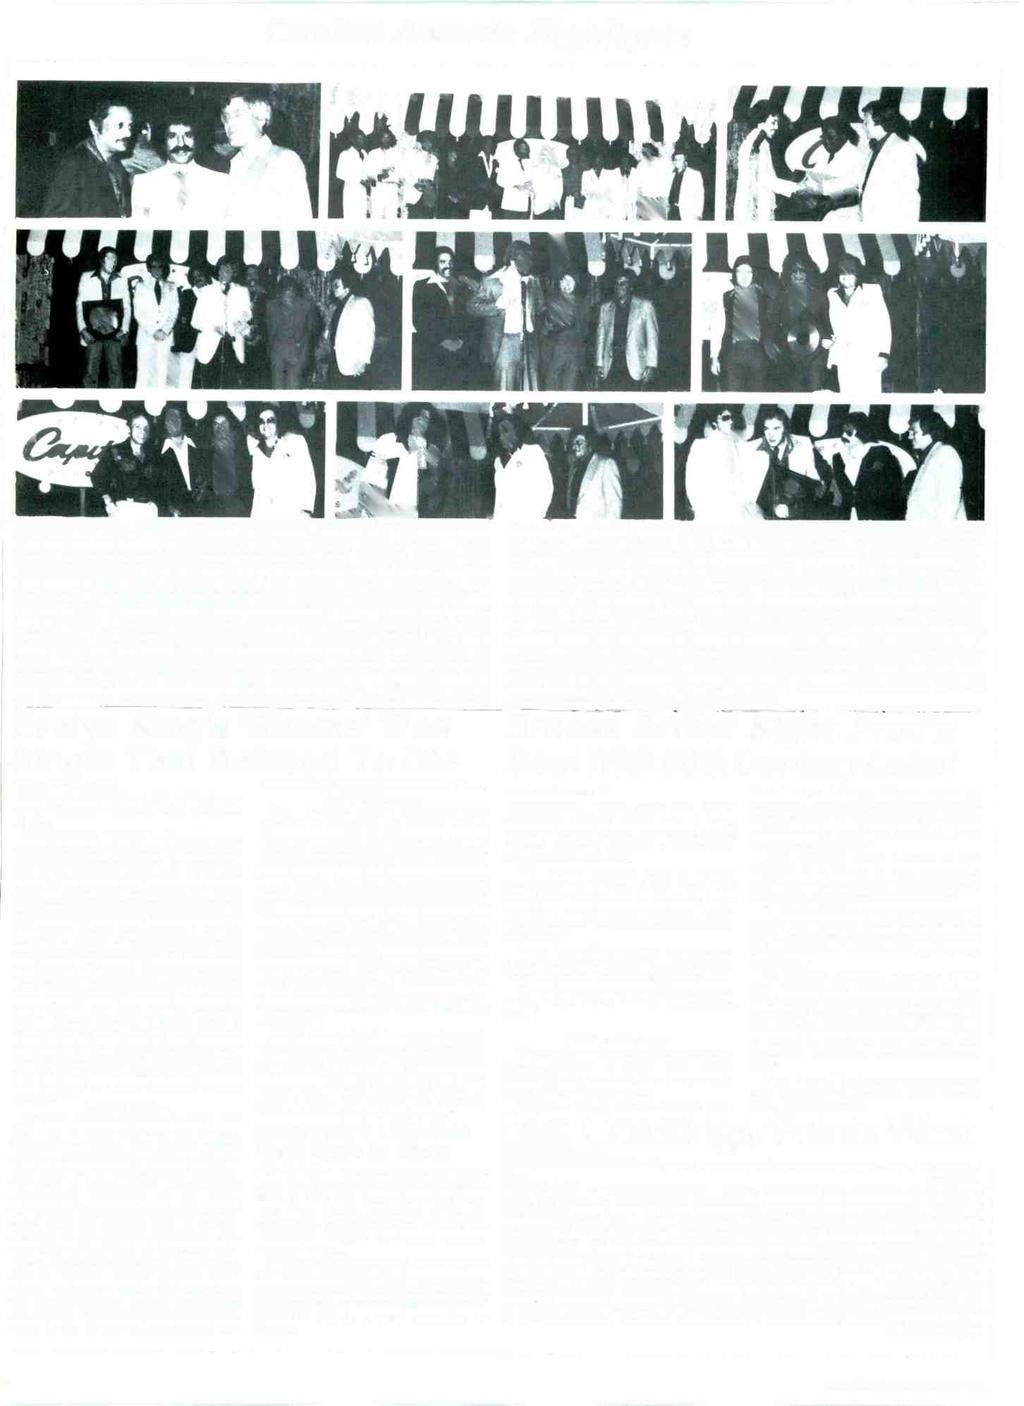 Capitol Awards Highlights 30 Cash Box/September 30, 1978 CAPITOL AWARDS - Capitol Records recently held its "Sales and Promotion Awards for fiscal 1977-78" dinner at North Hollywood's Universal